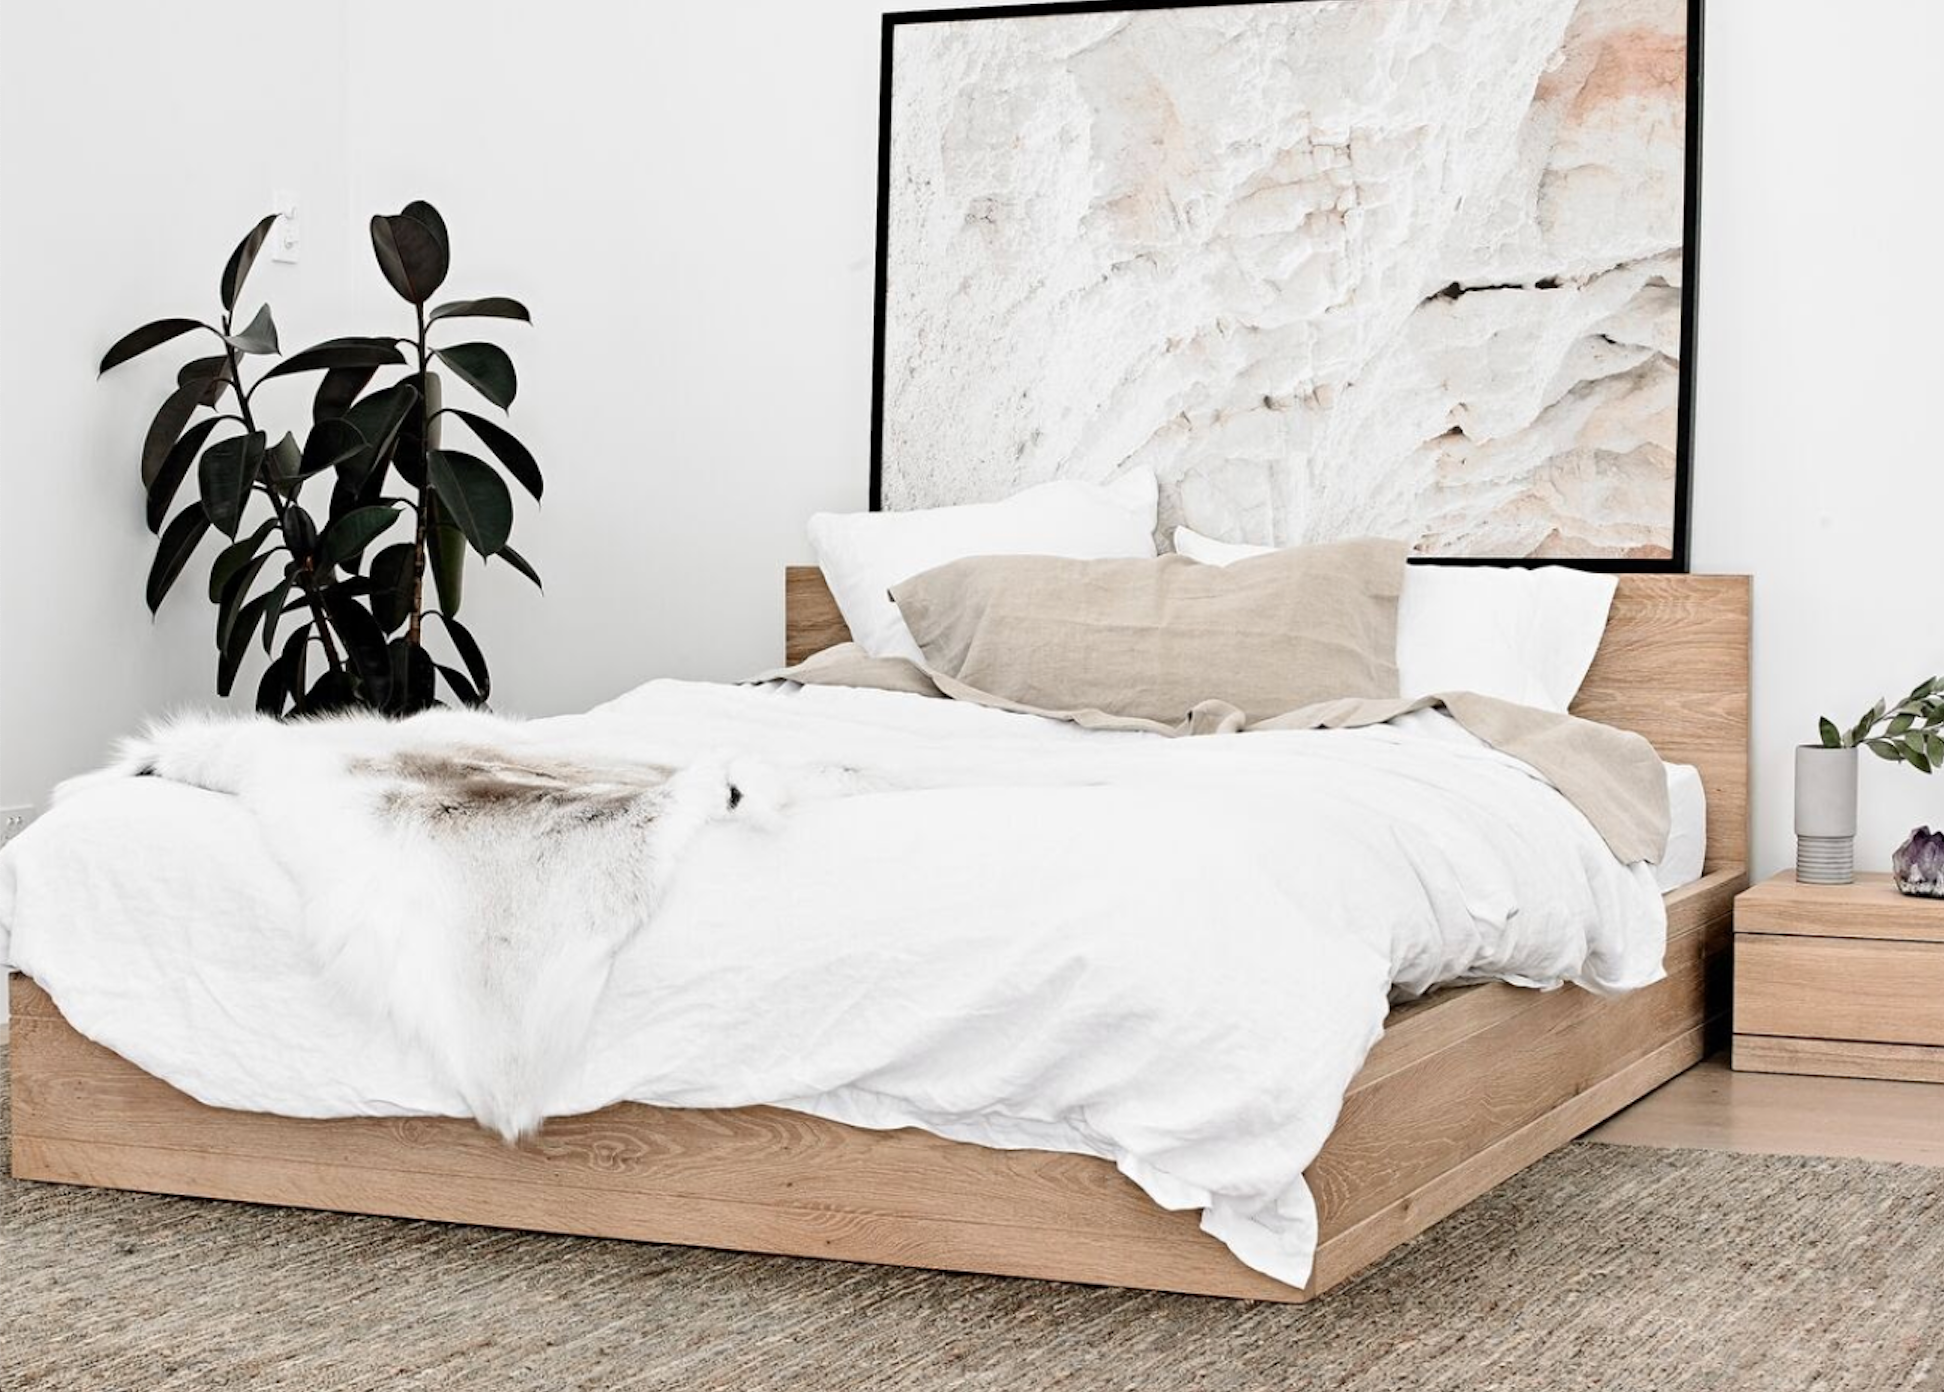 4 TIPS FOR CHOOSING THE PERFECT BED